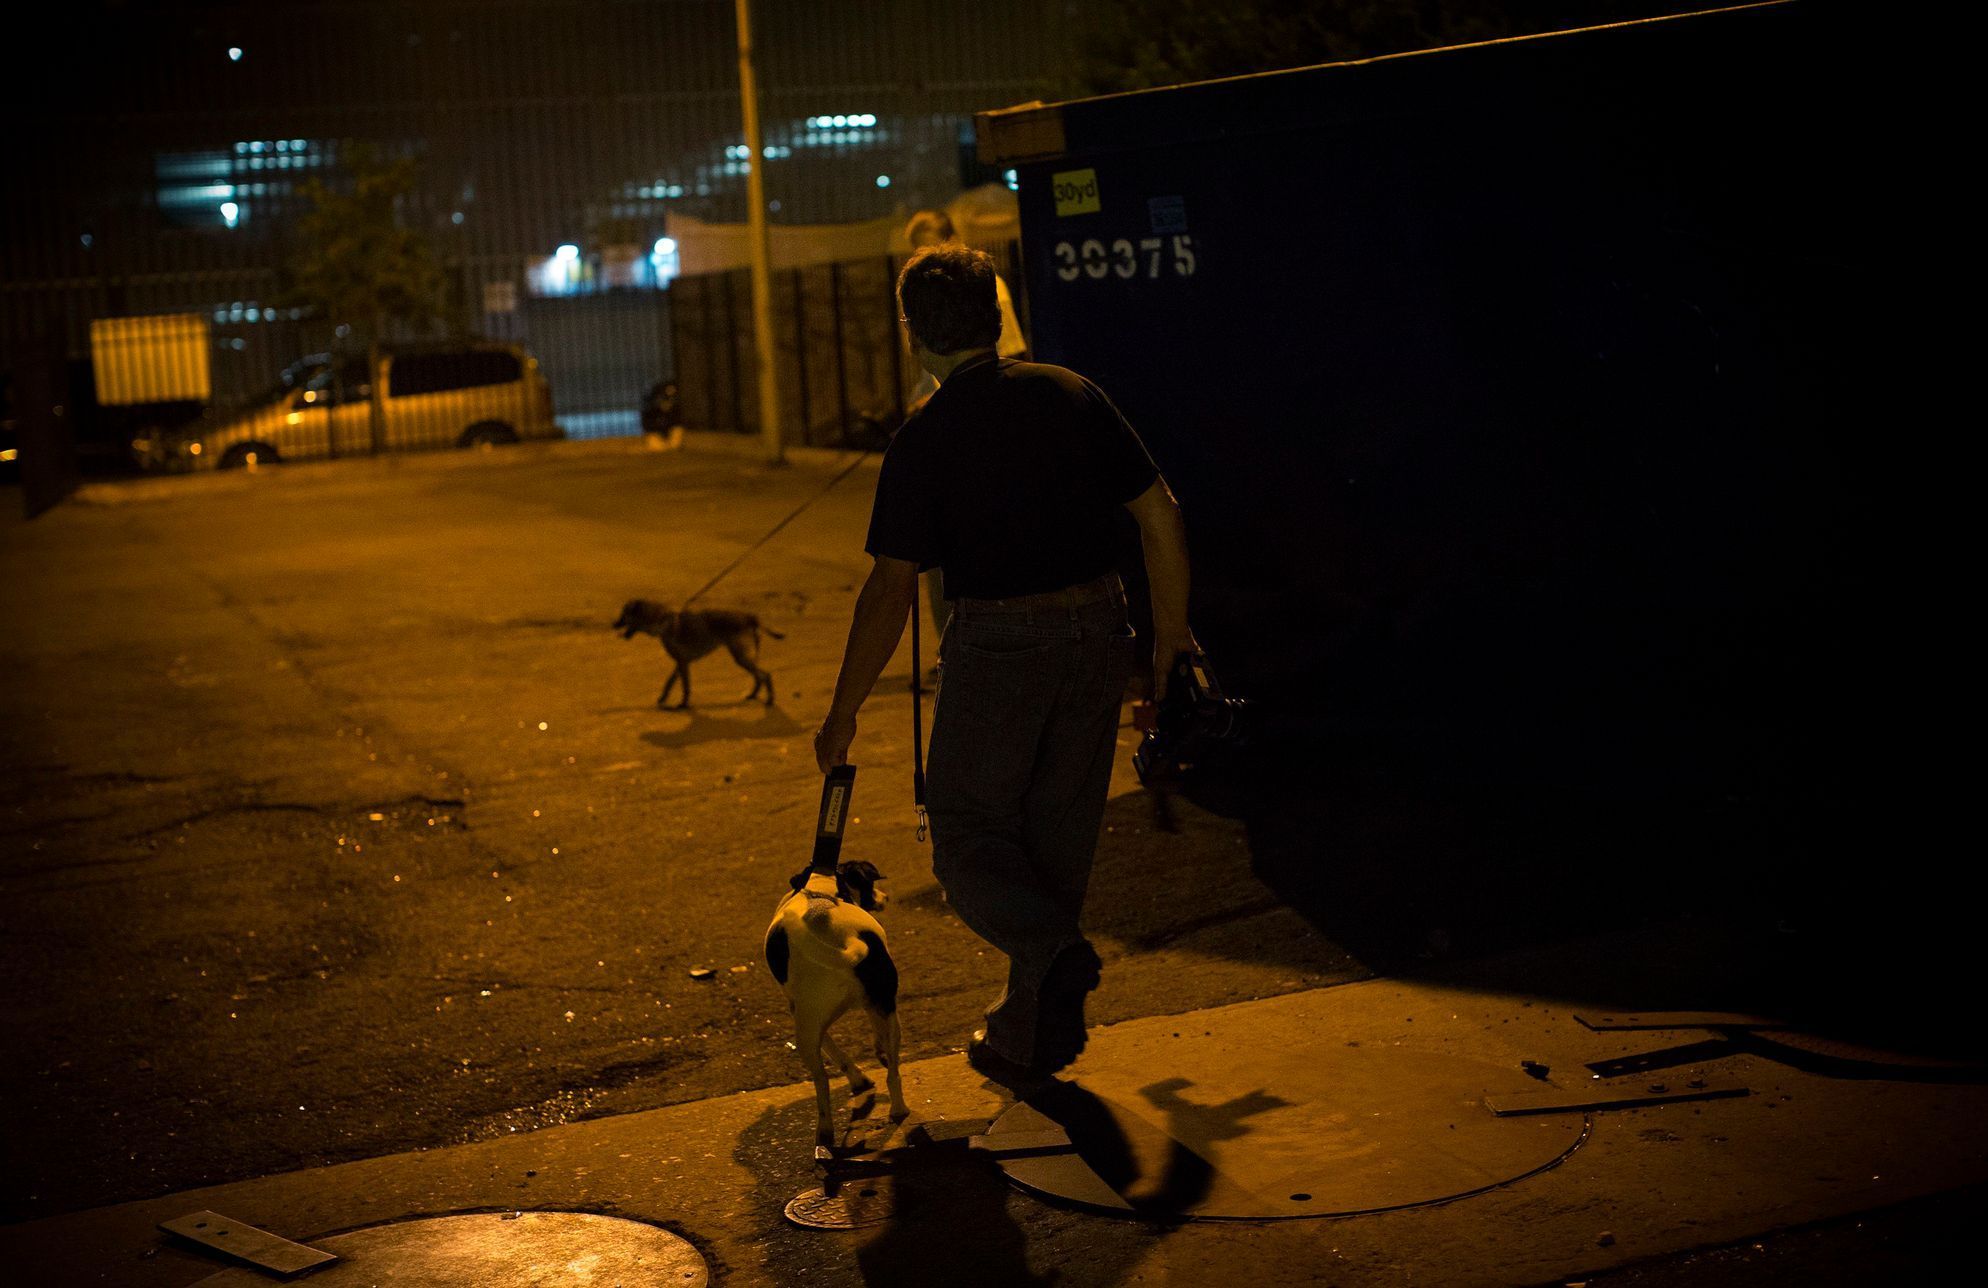 Bill leads his dog Paco, a Feist Terrier, though a vacant lot near trash dumpsters during an organized rat hunt on New York City's Lower East Side